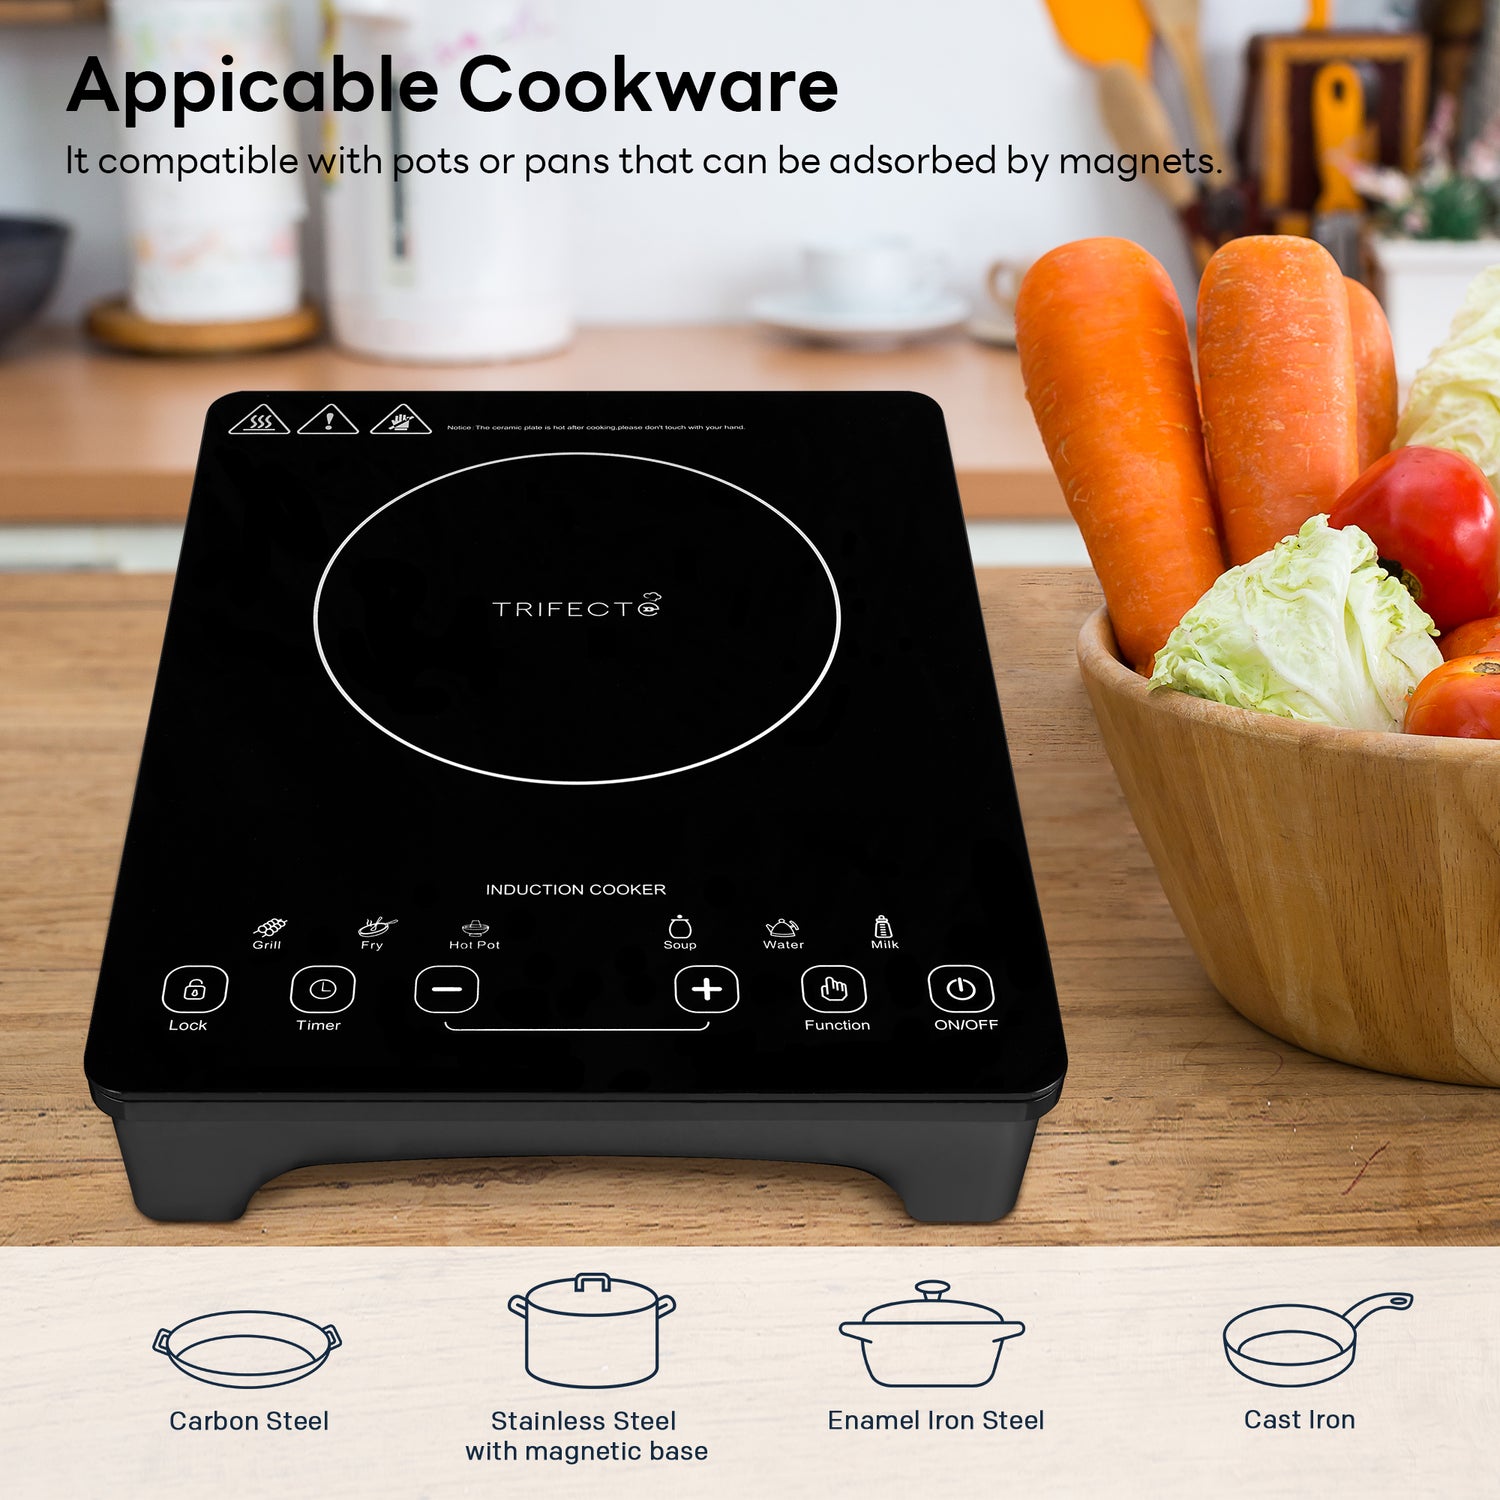 11 portable induction cooktop is suitable for 8inch wide carbon steel, stainless steel with magnetic base, enamel Iron steel, cast Iron